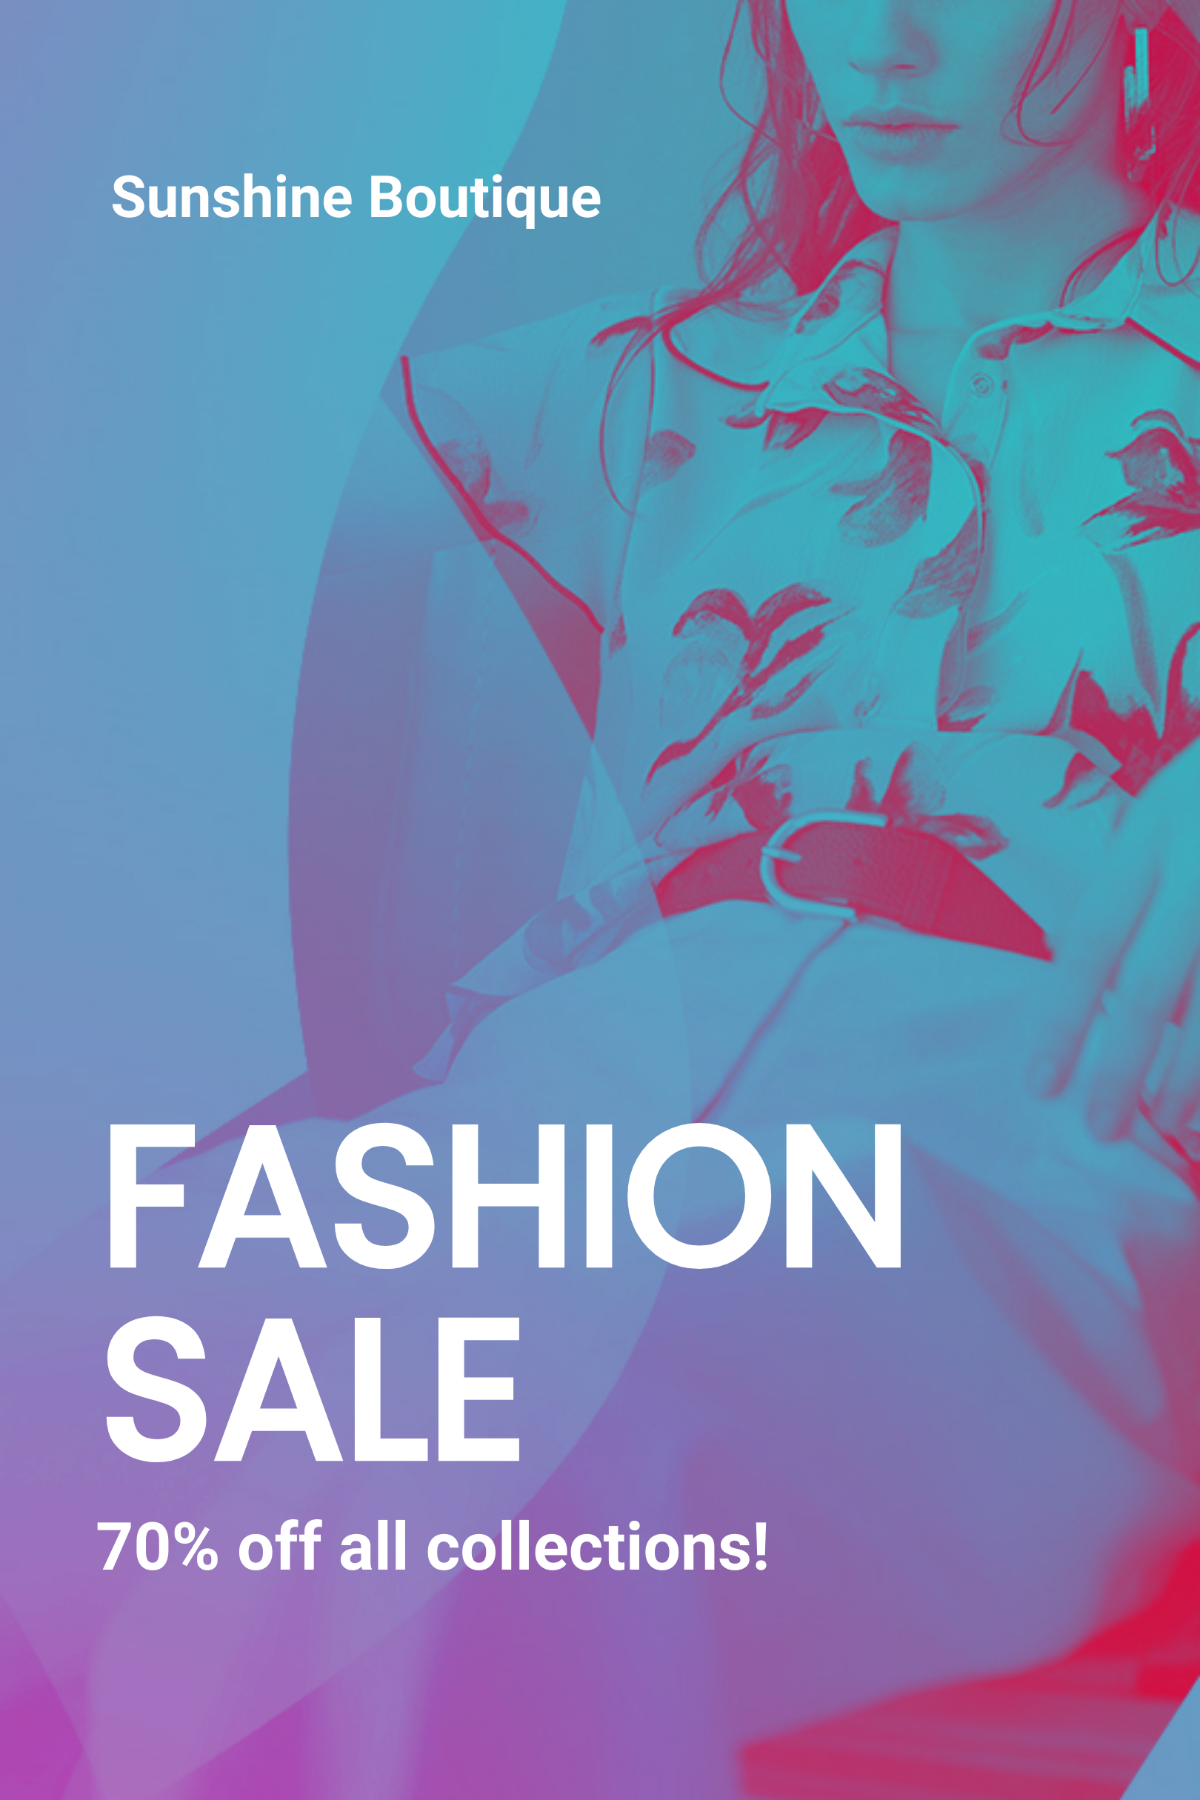 Free Fashion Products Sale Tumblr Post Template